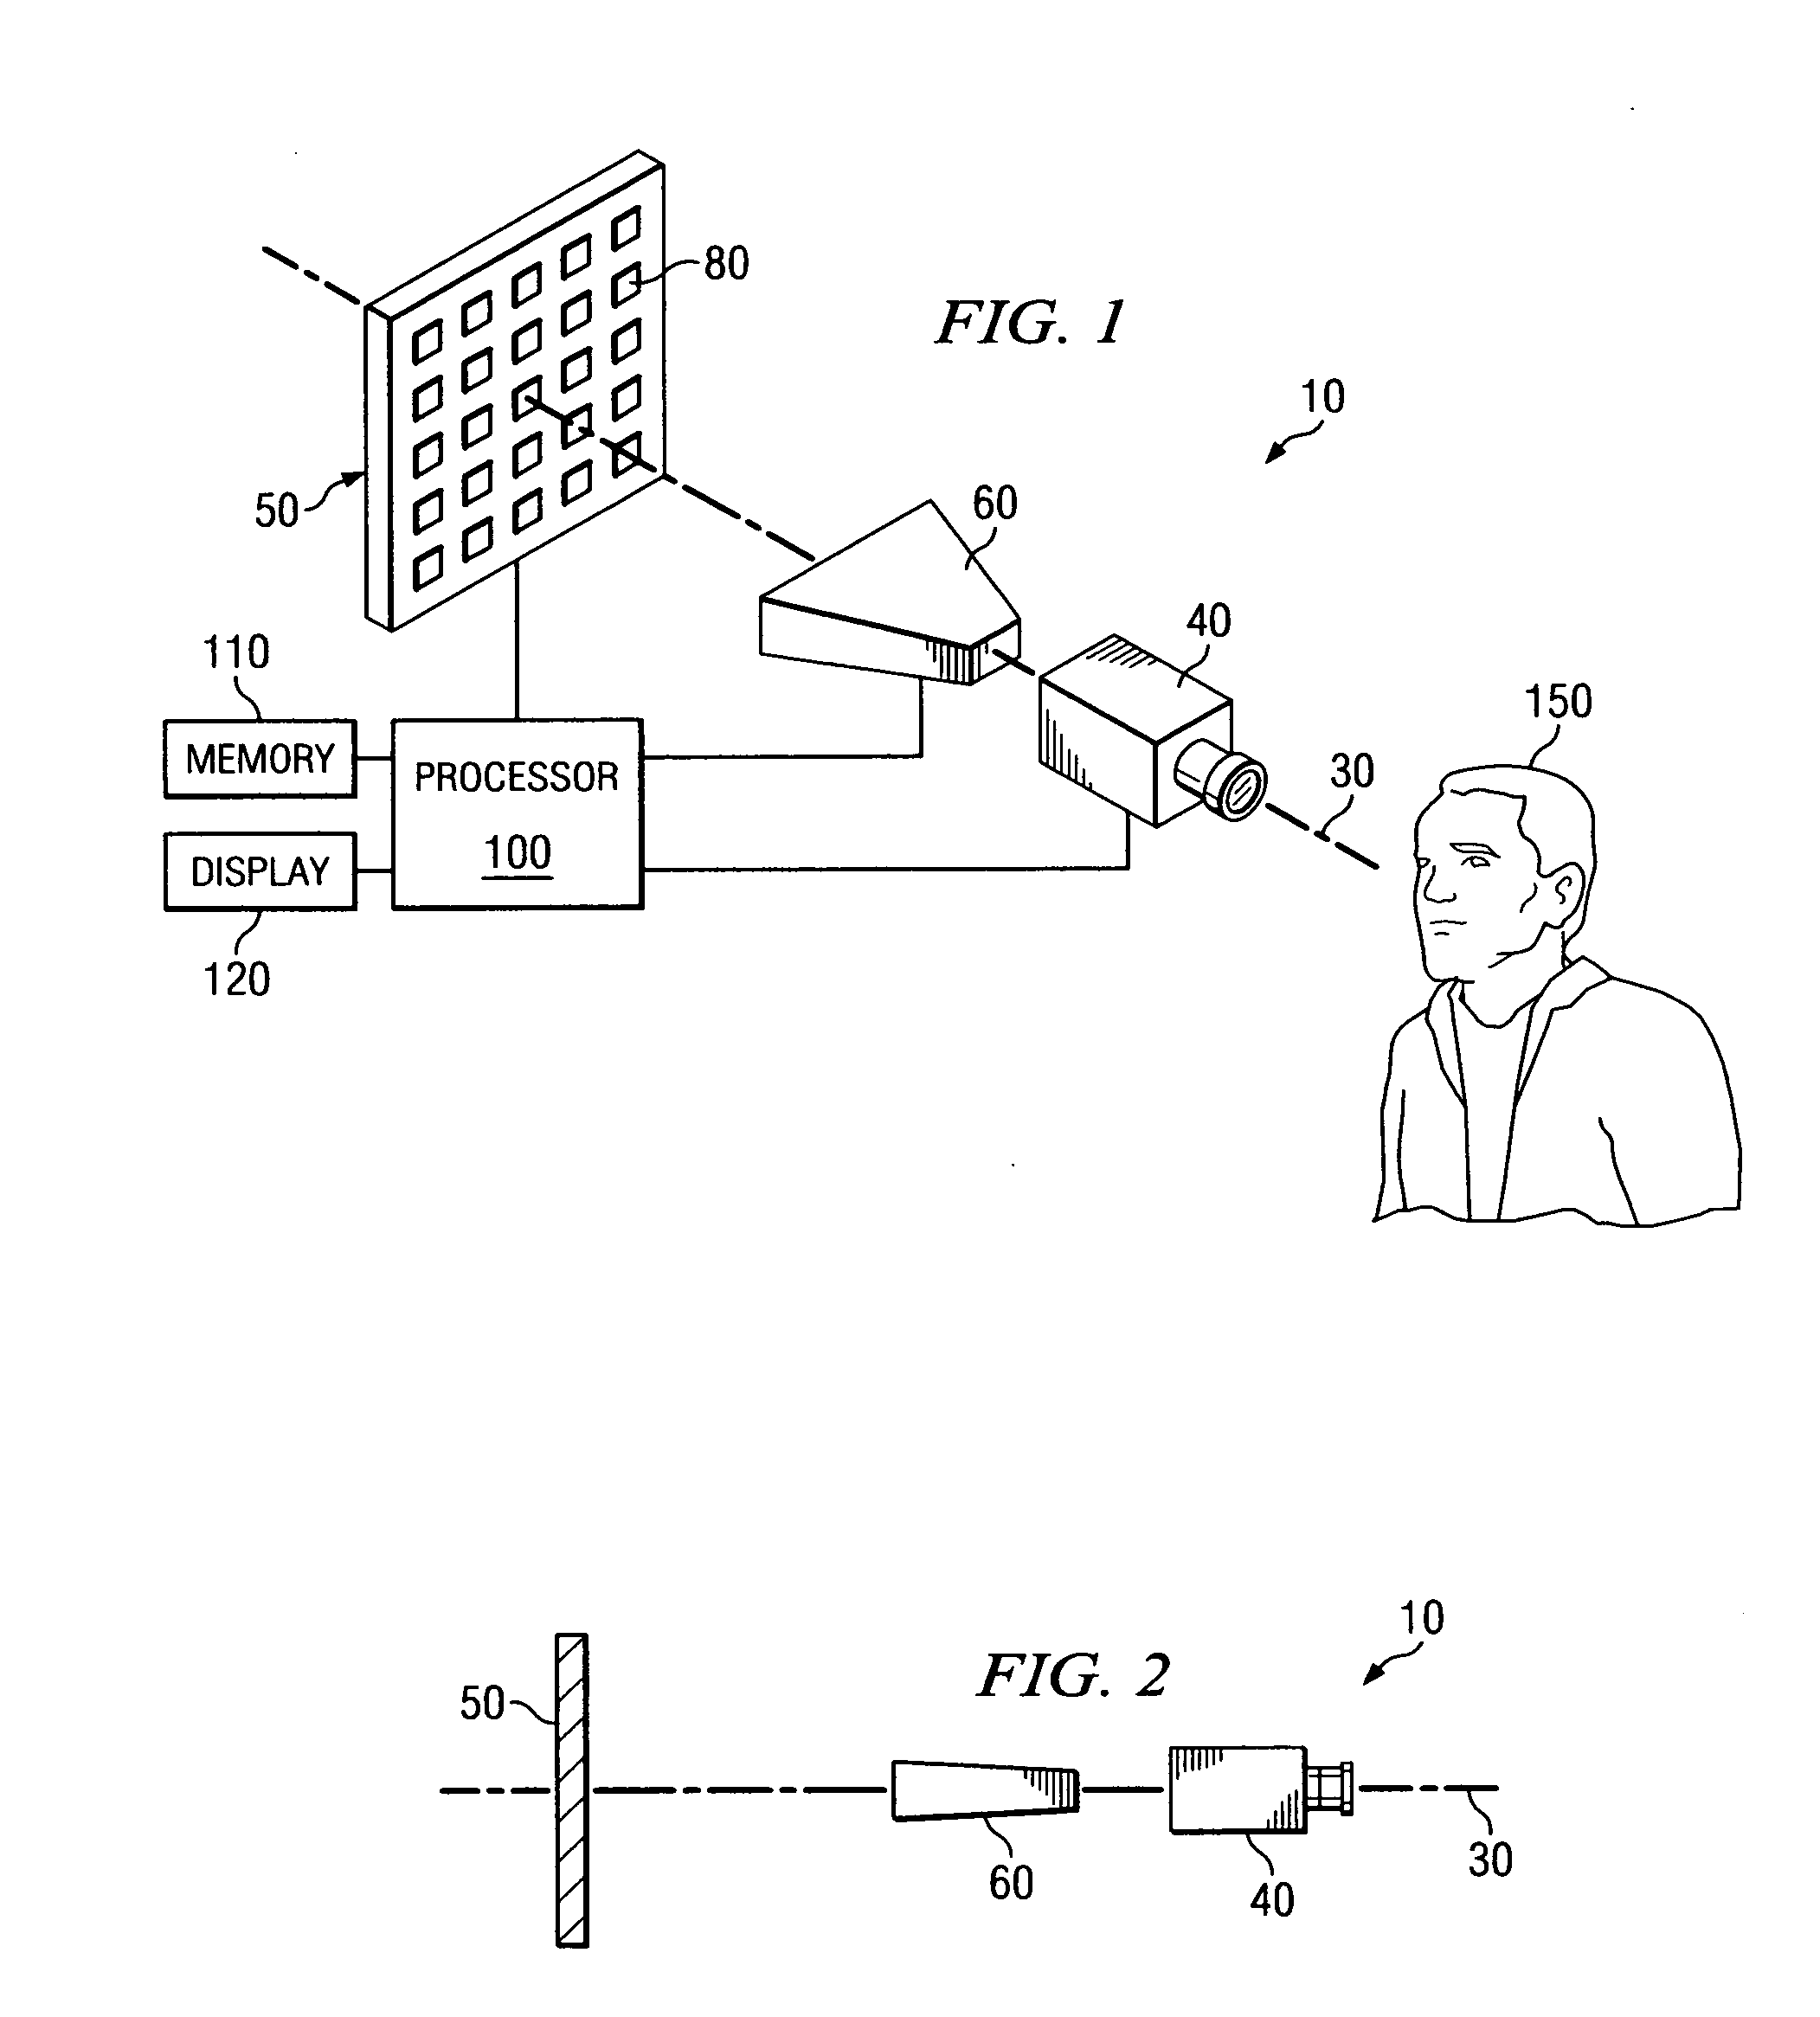 Coaxial bi-modal imaging system for combined microwave and optical imaging